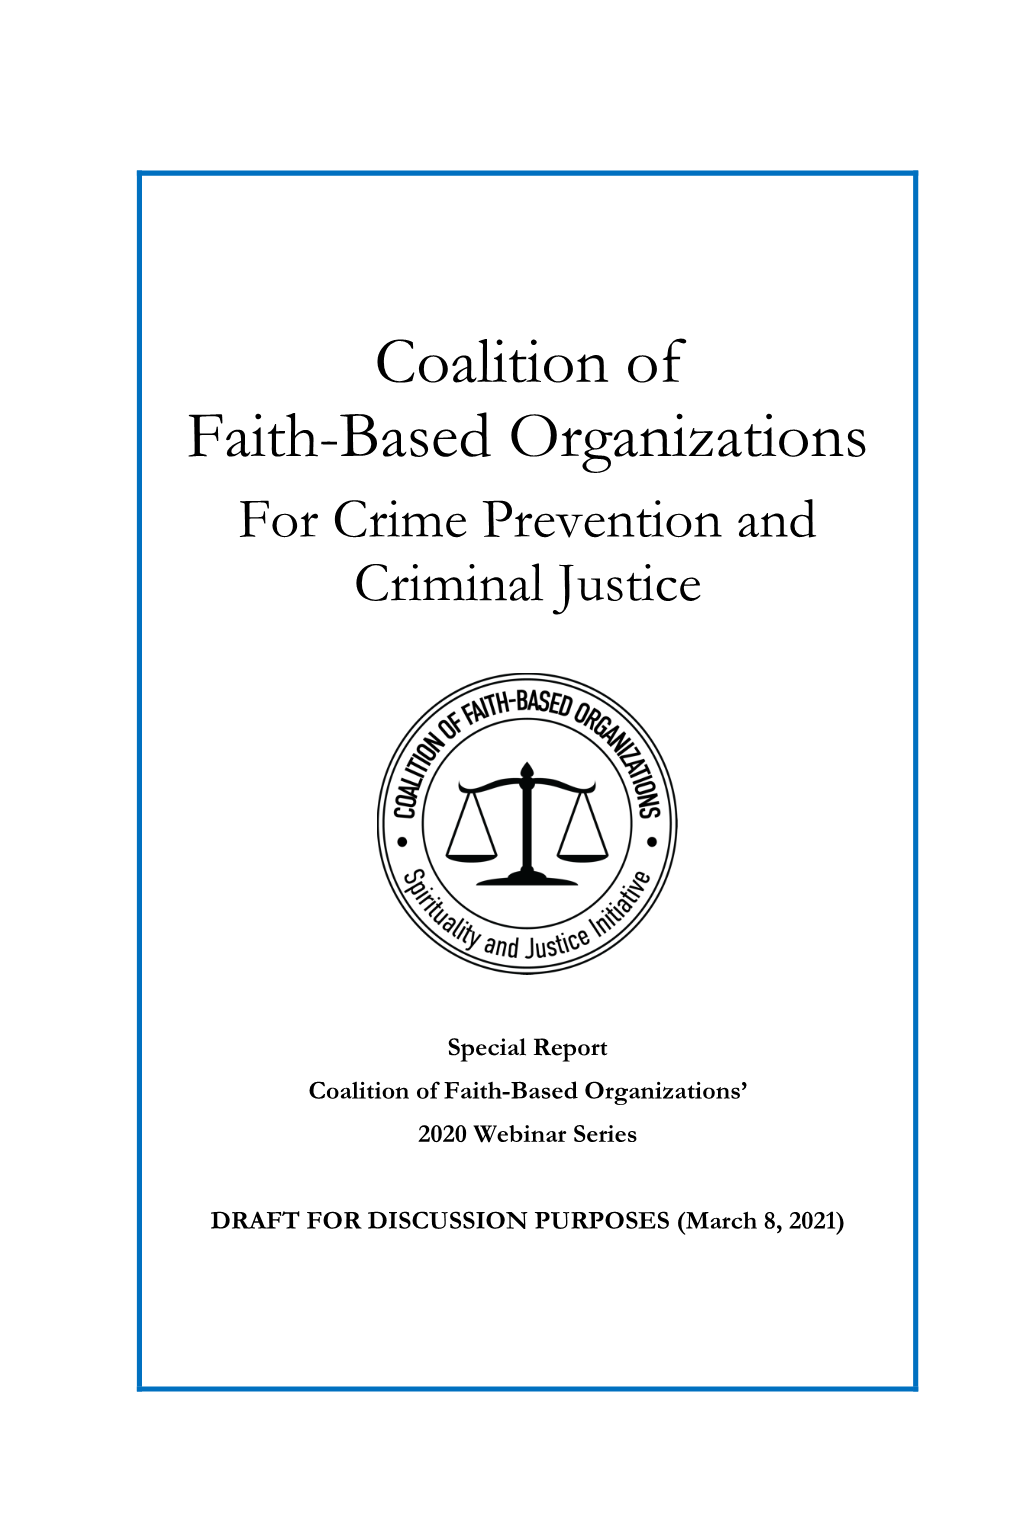 Coalition of Faith-Based Organizations for Crime Prevention and Criminal Justice